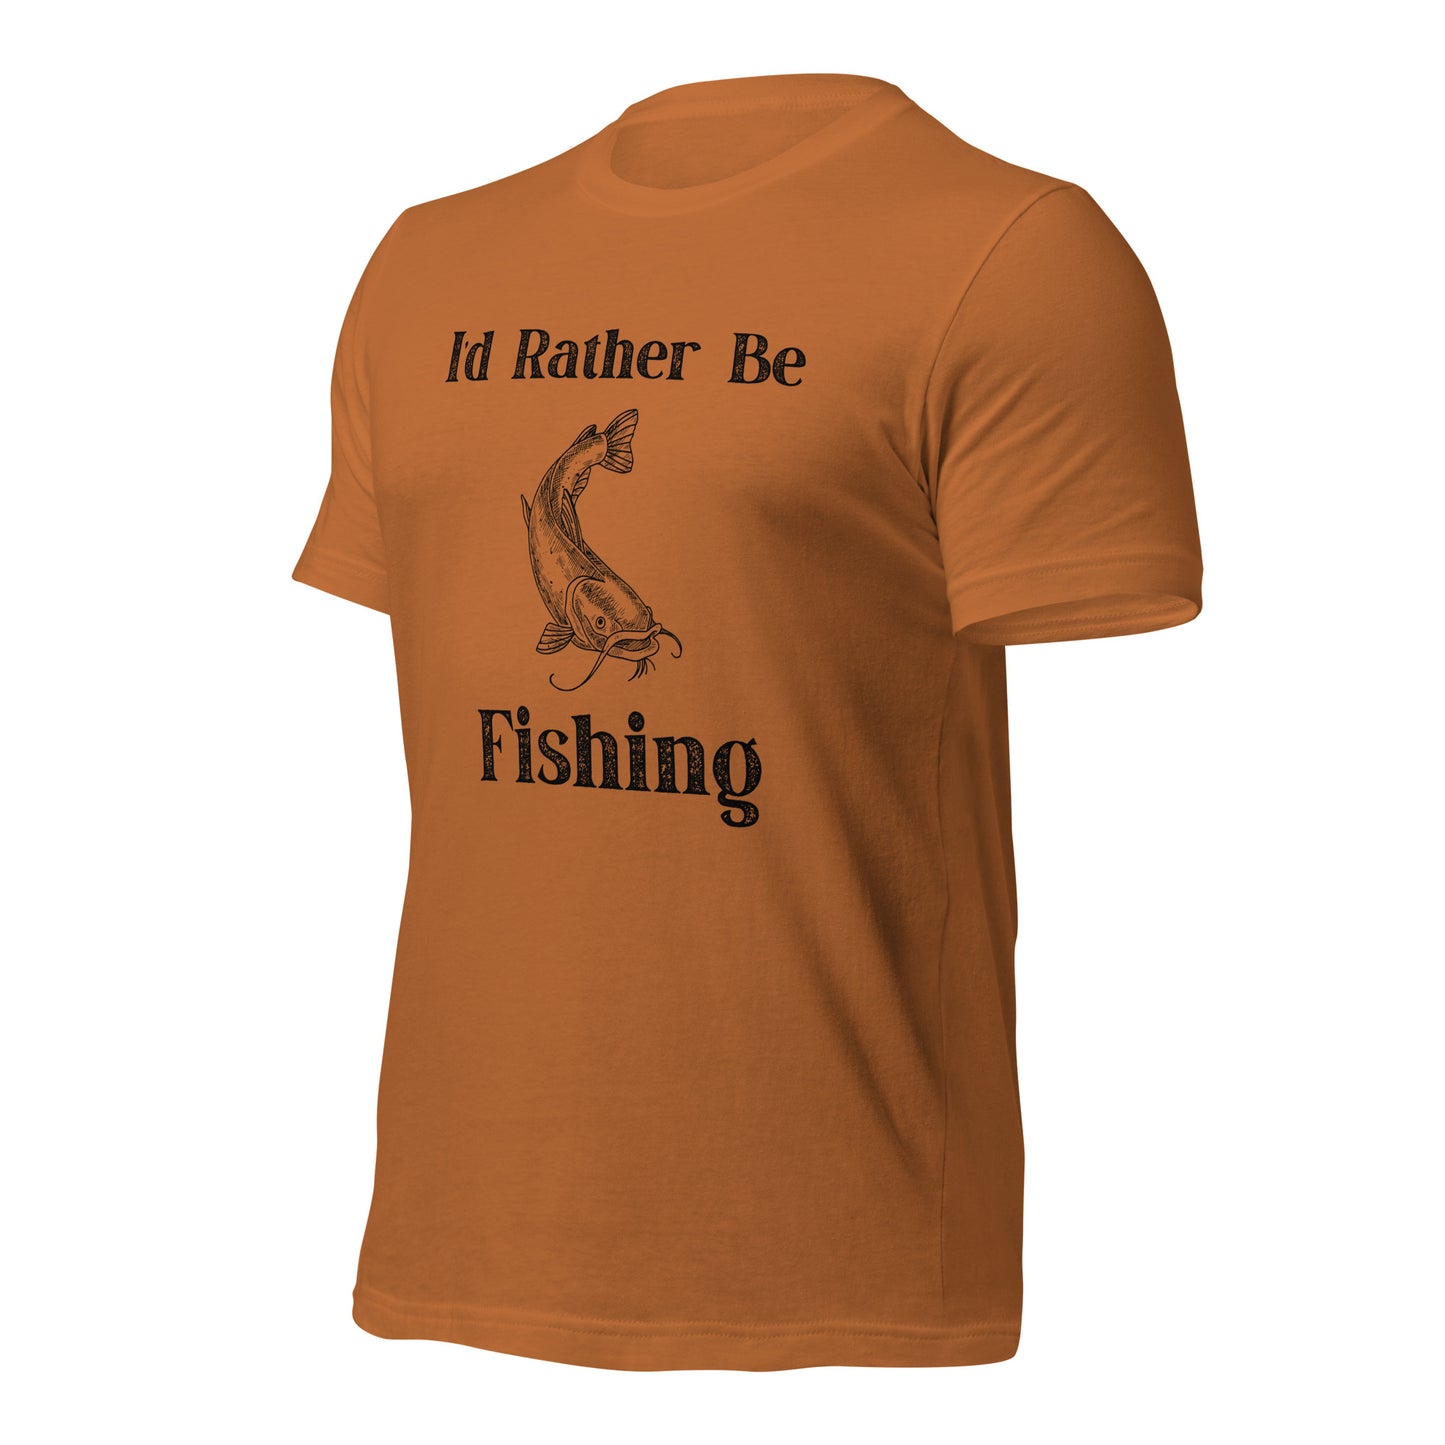 Durable "I'd Rather Be Fishing" tee, perfect for casual wear.